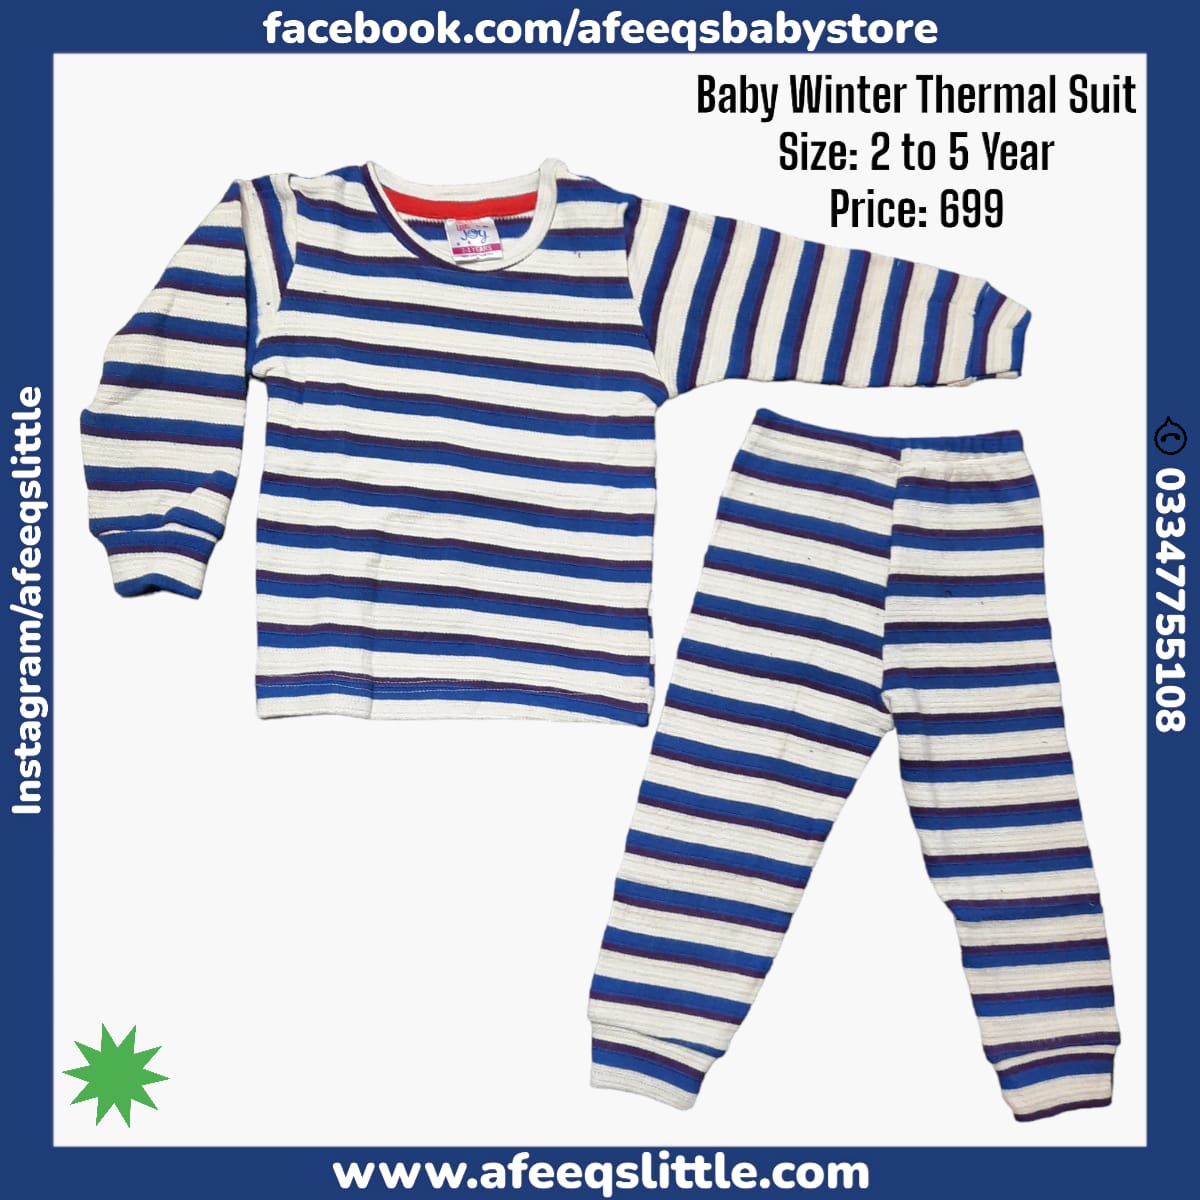 Warm Winter Thermal Night Suit, Afeeqs Little